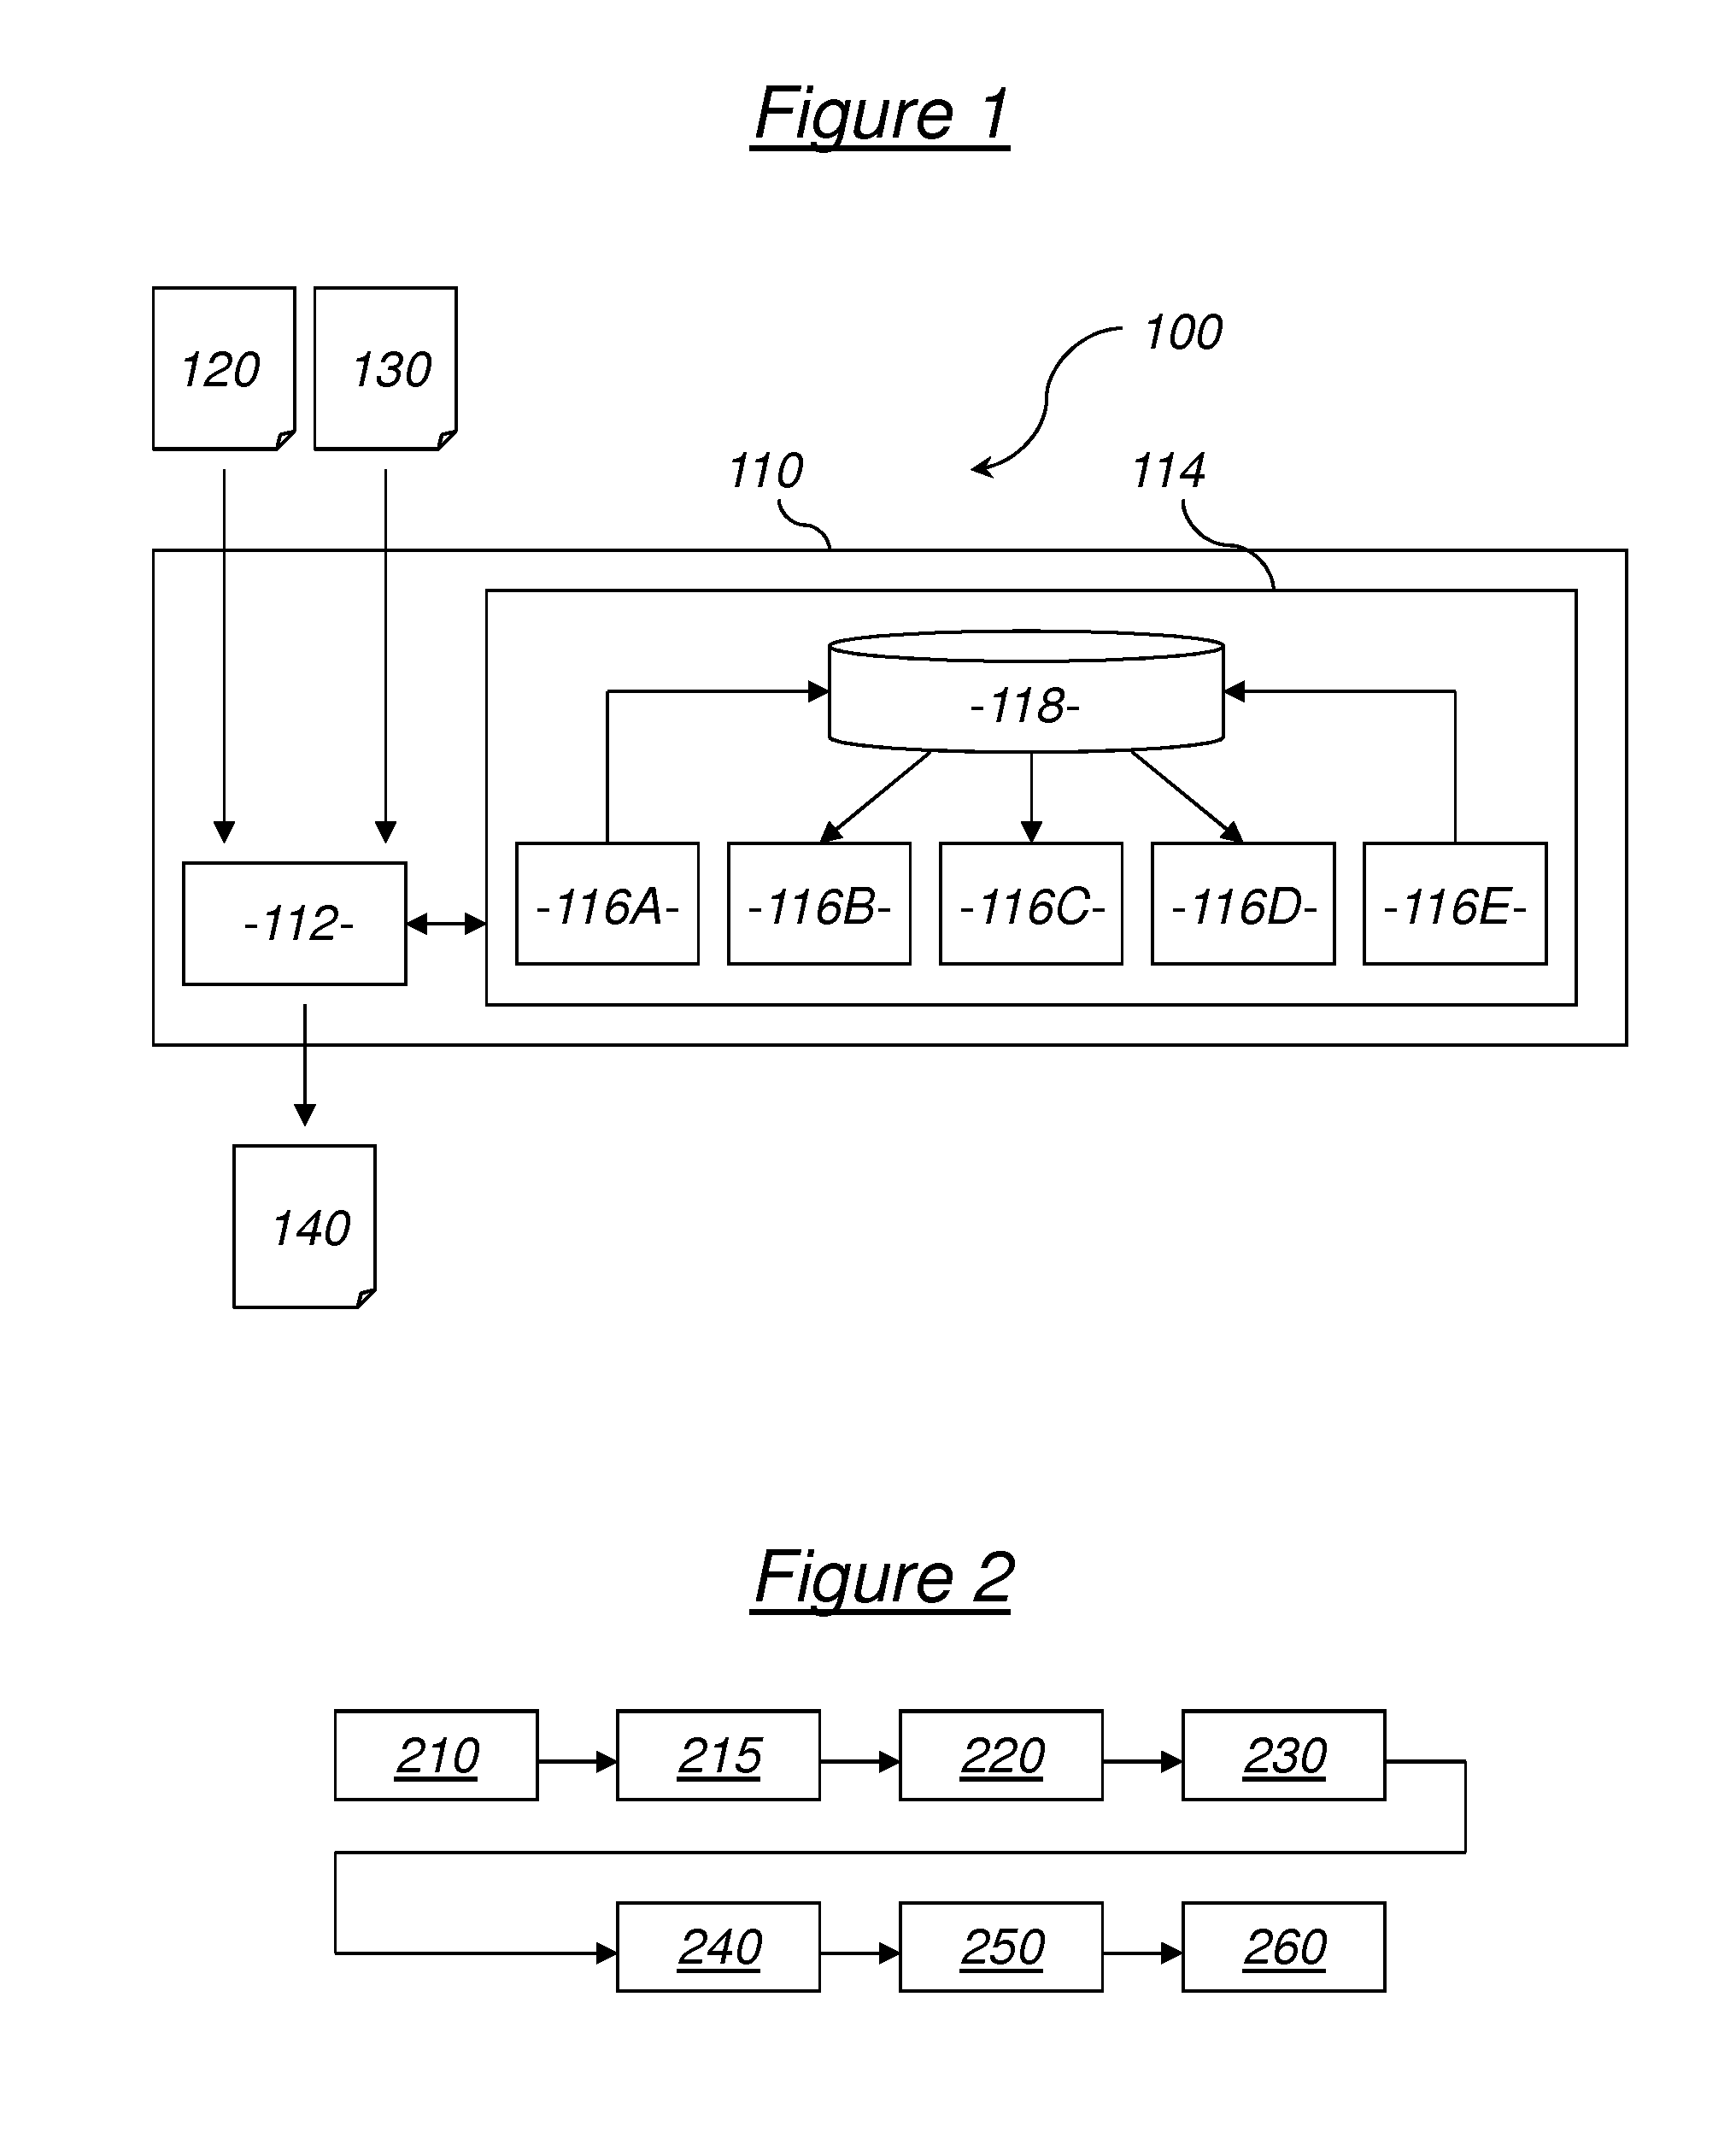 Method, system and computer program for assigning an assortment of products to an existing planogram